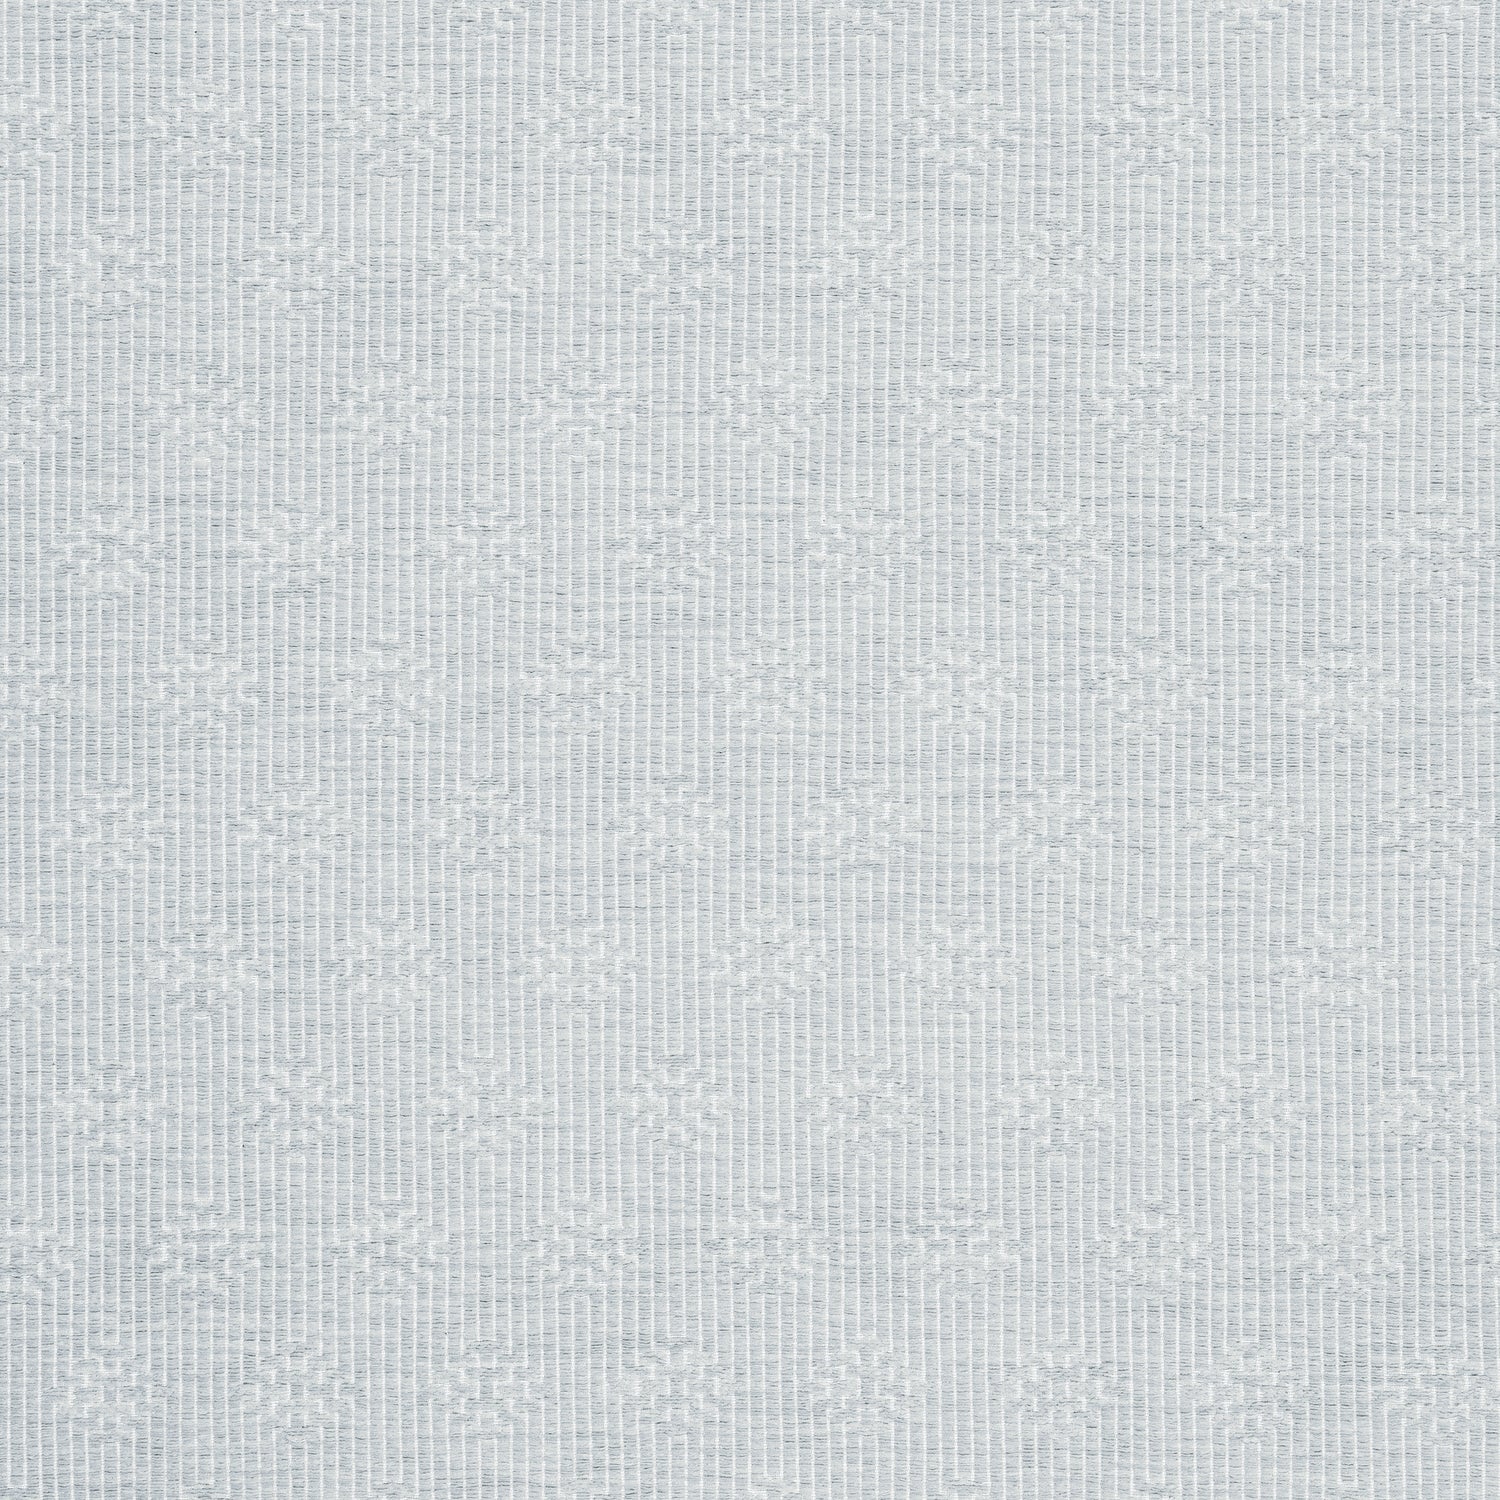 Crete fabric in mist color - pattern number W74208 - by Thibaut in the Passage collection